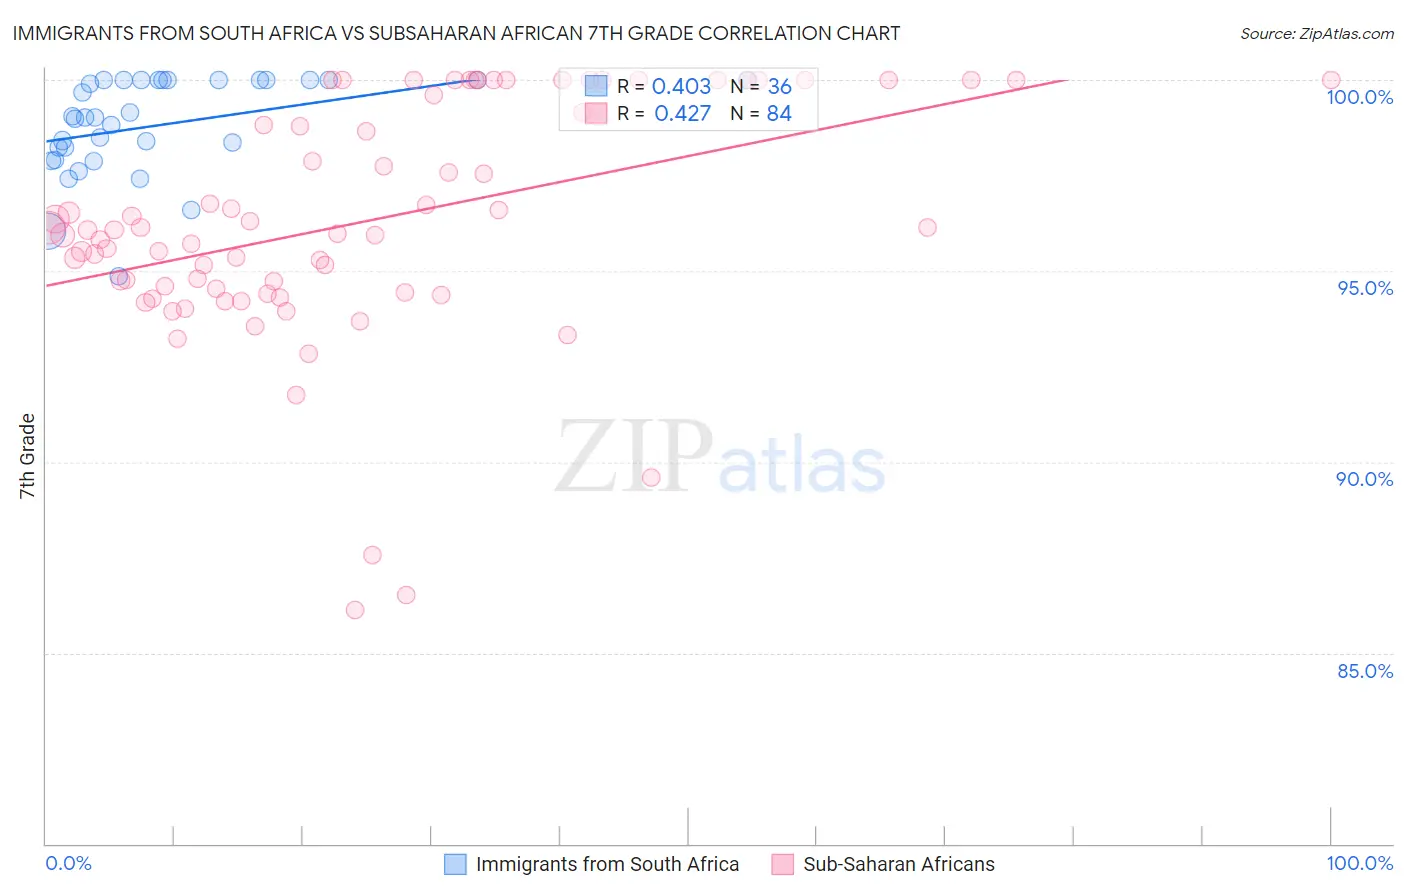 Immigrants from South Africa vs Subsaharan African 7th Grade